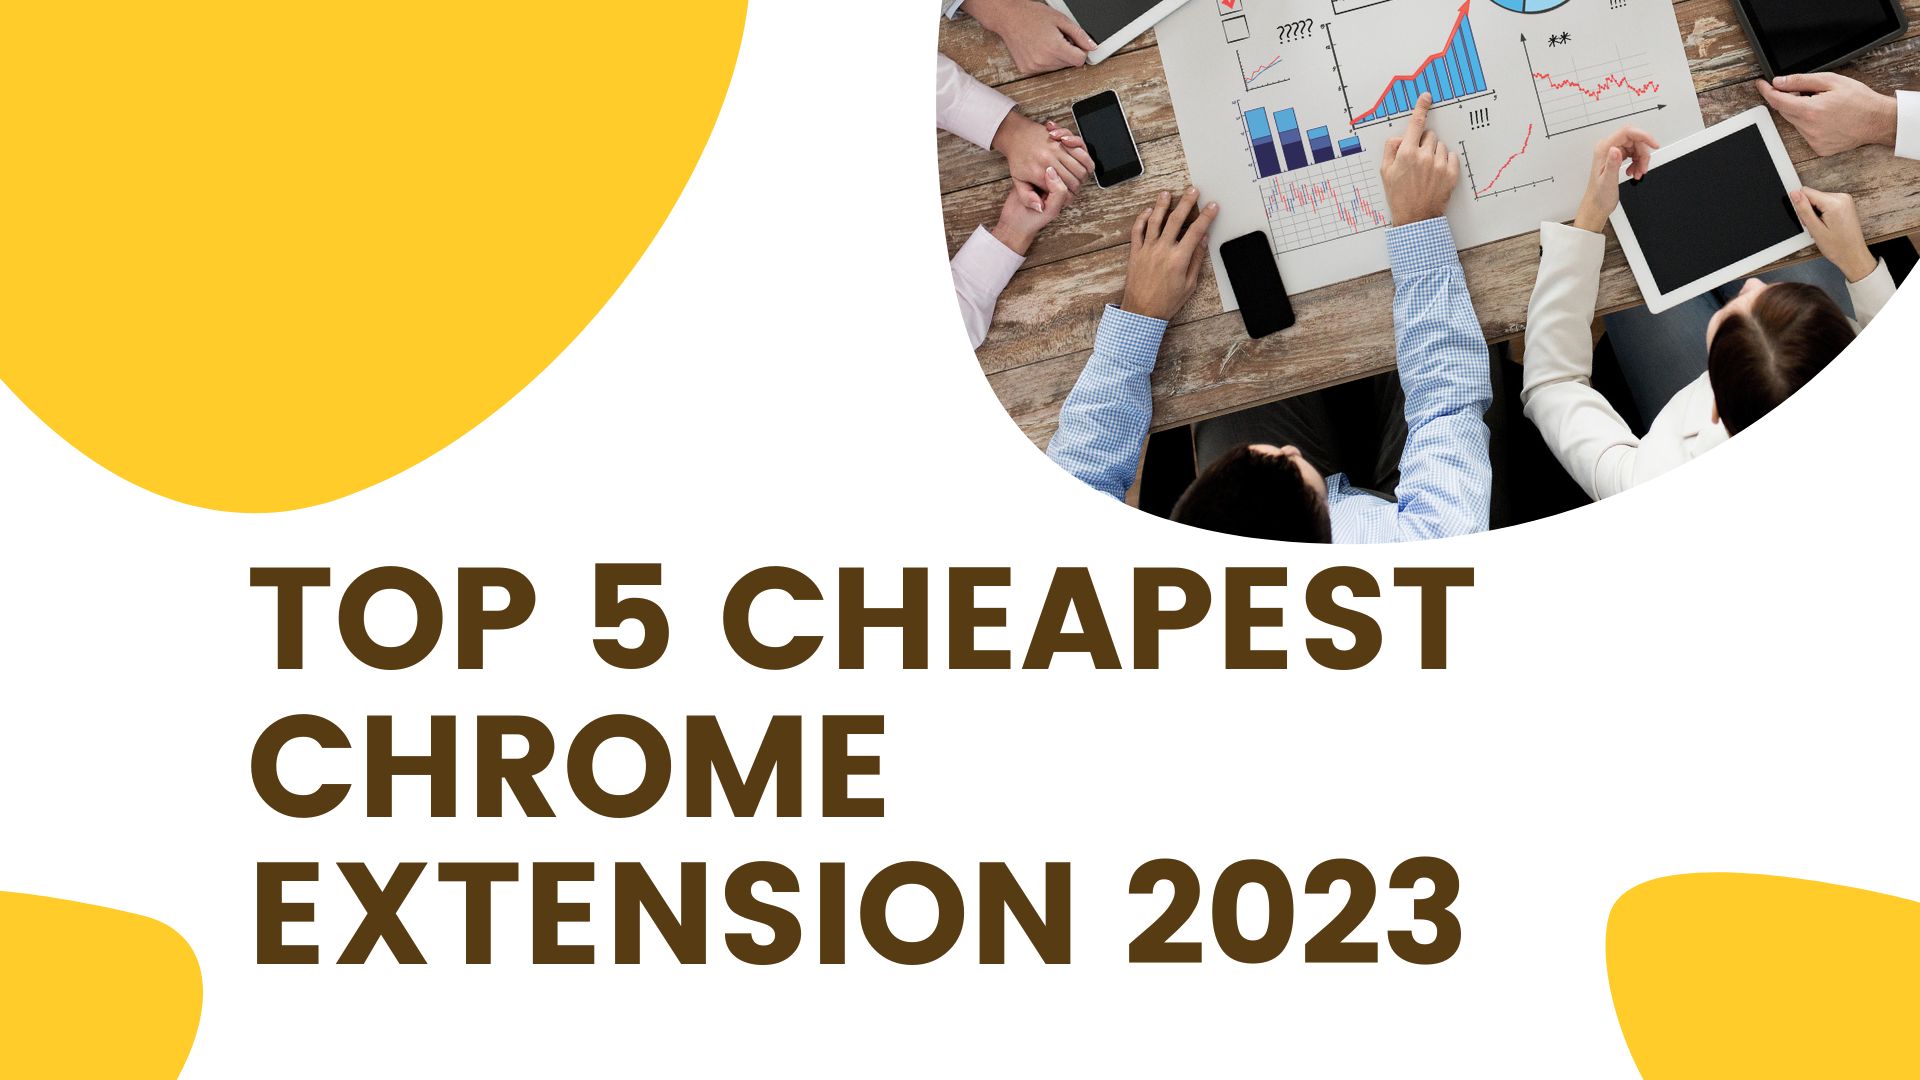 Top 5 cheapest Chrome extension 2023